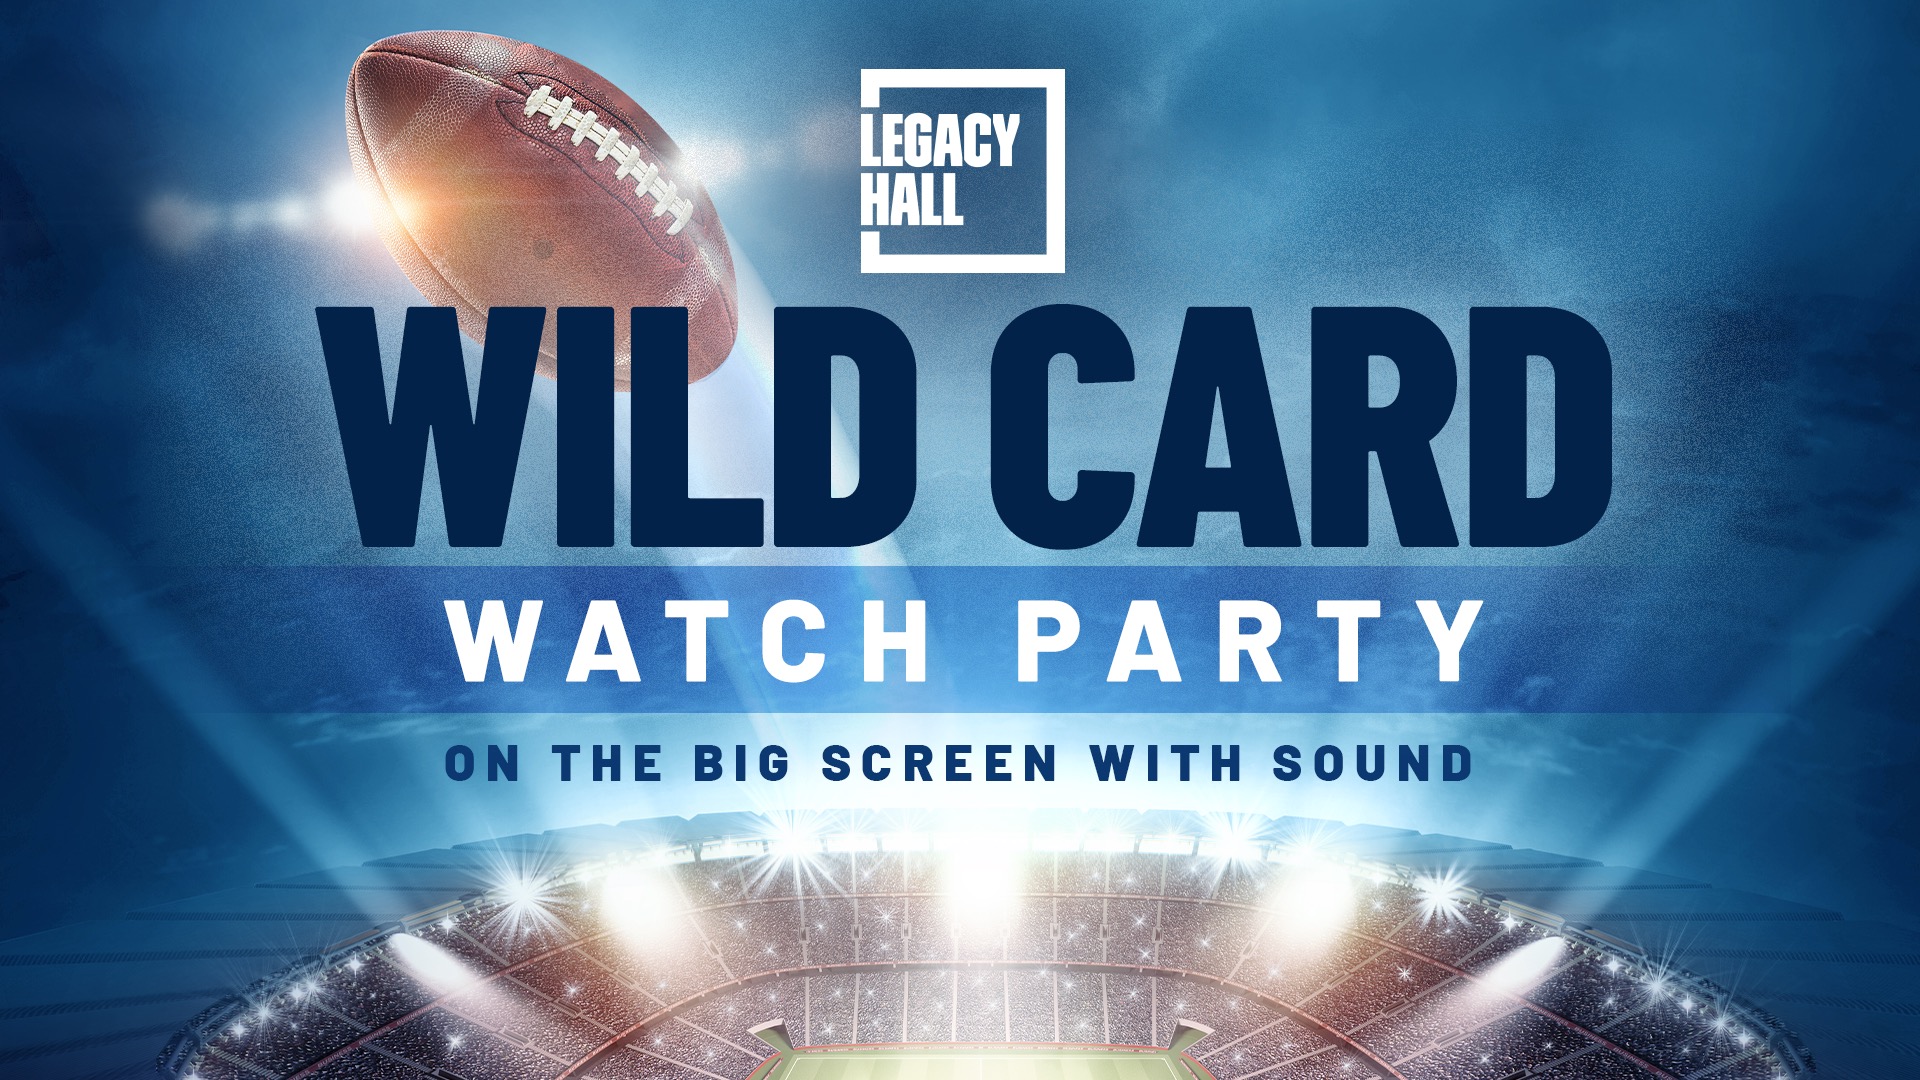 Wild Card Watch Party Image Facebook